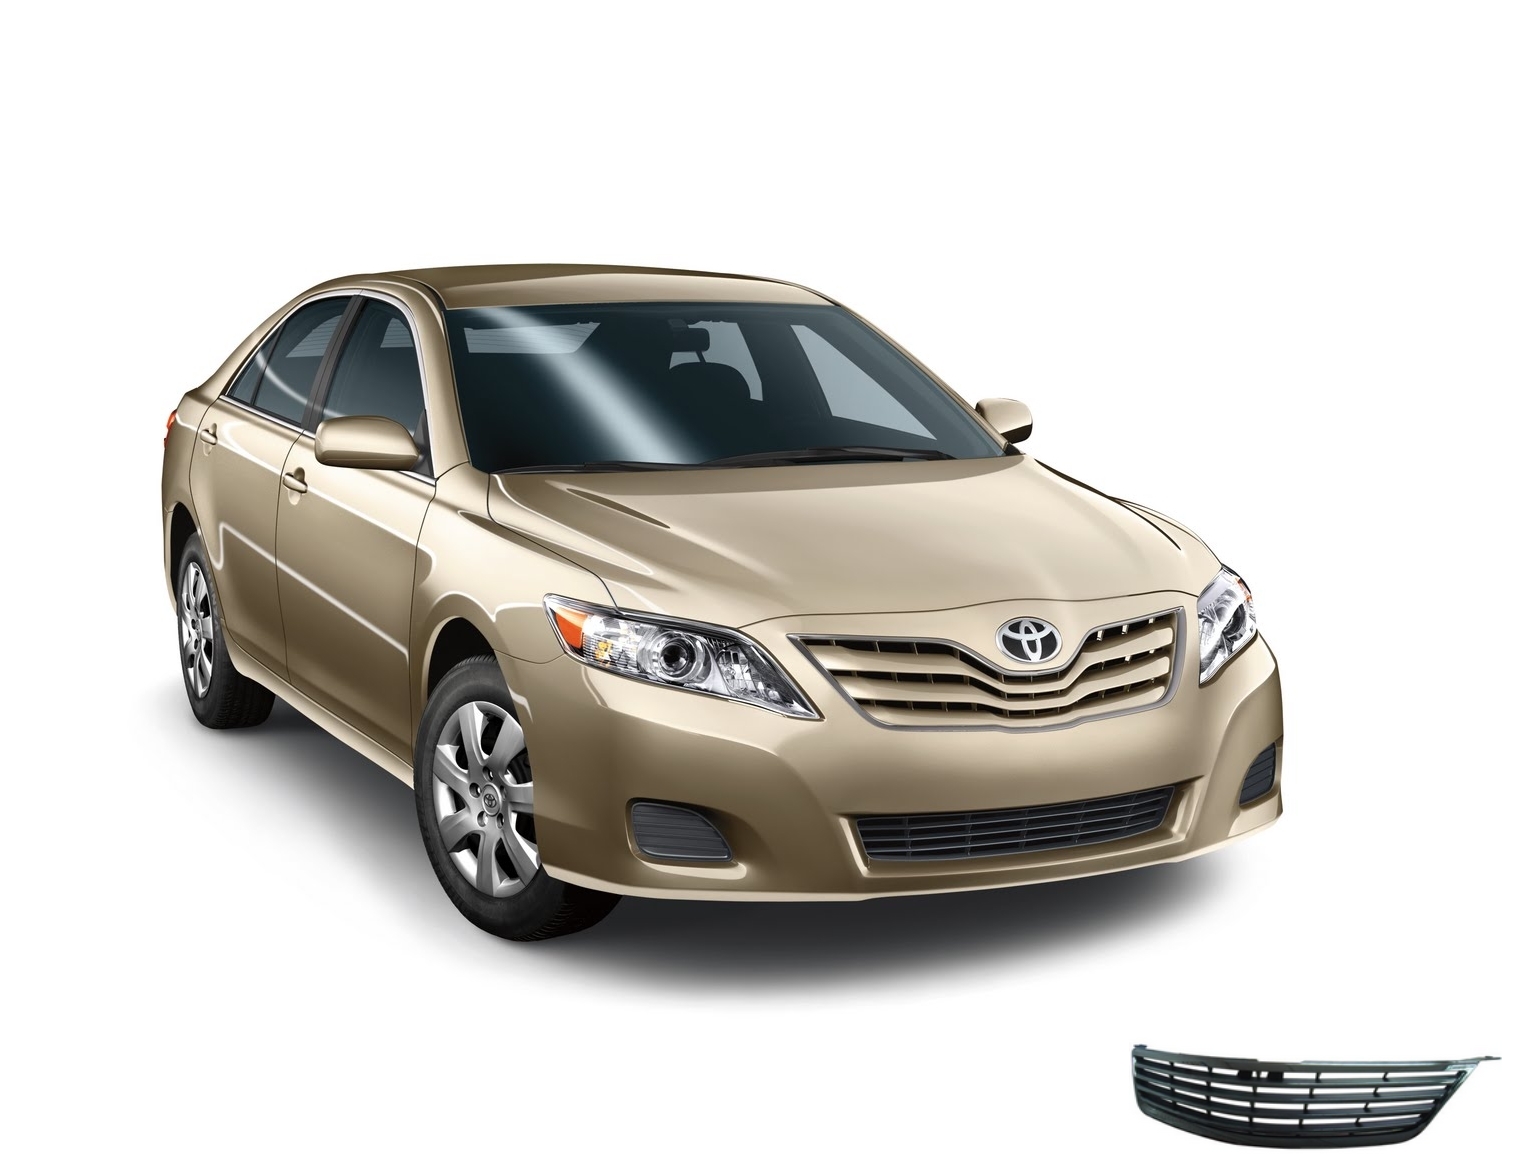 multiplewallpapers: Toyota Camry 2011 Wallpapers